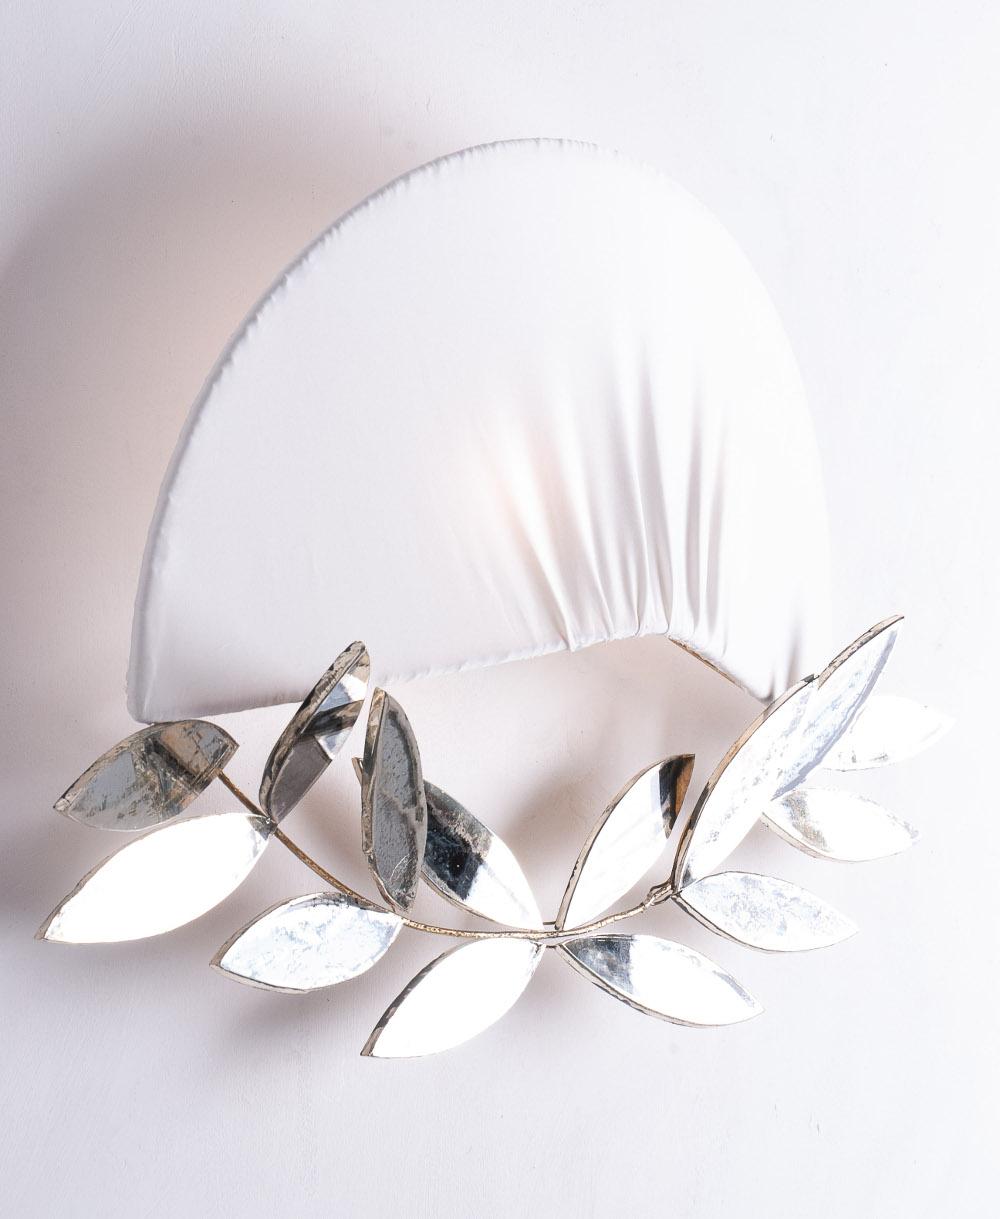 Inspired by the Academics ' high gala uniform, this unusual lamp seems to wear the Napoléon felucca-hat framed by an original laurel crown made of brass and glass leaves.
Silvered glass leaves are available in jade or smoky grey color, the silk